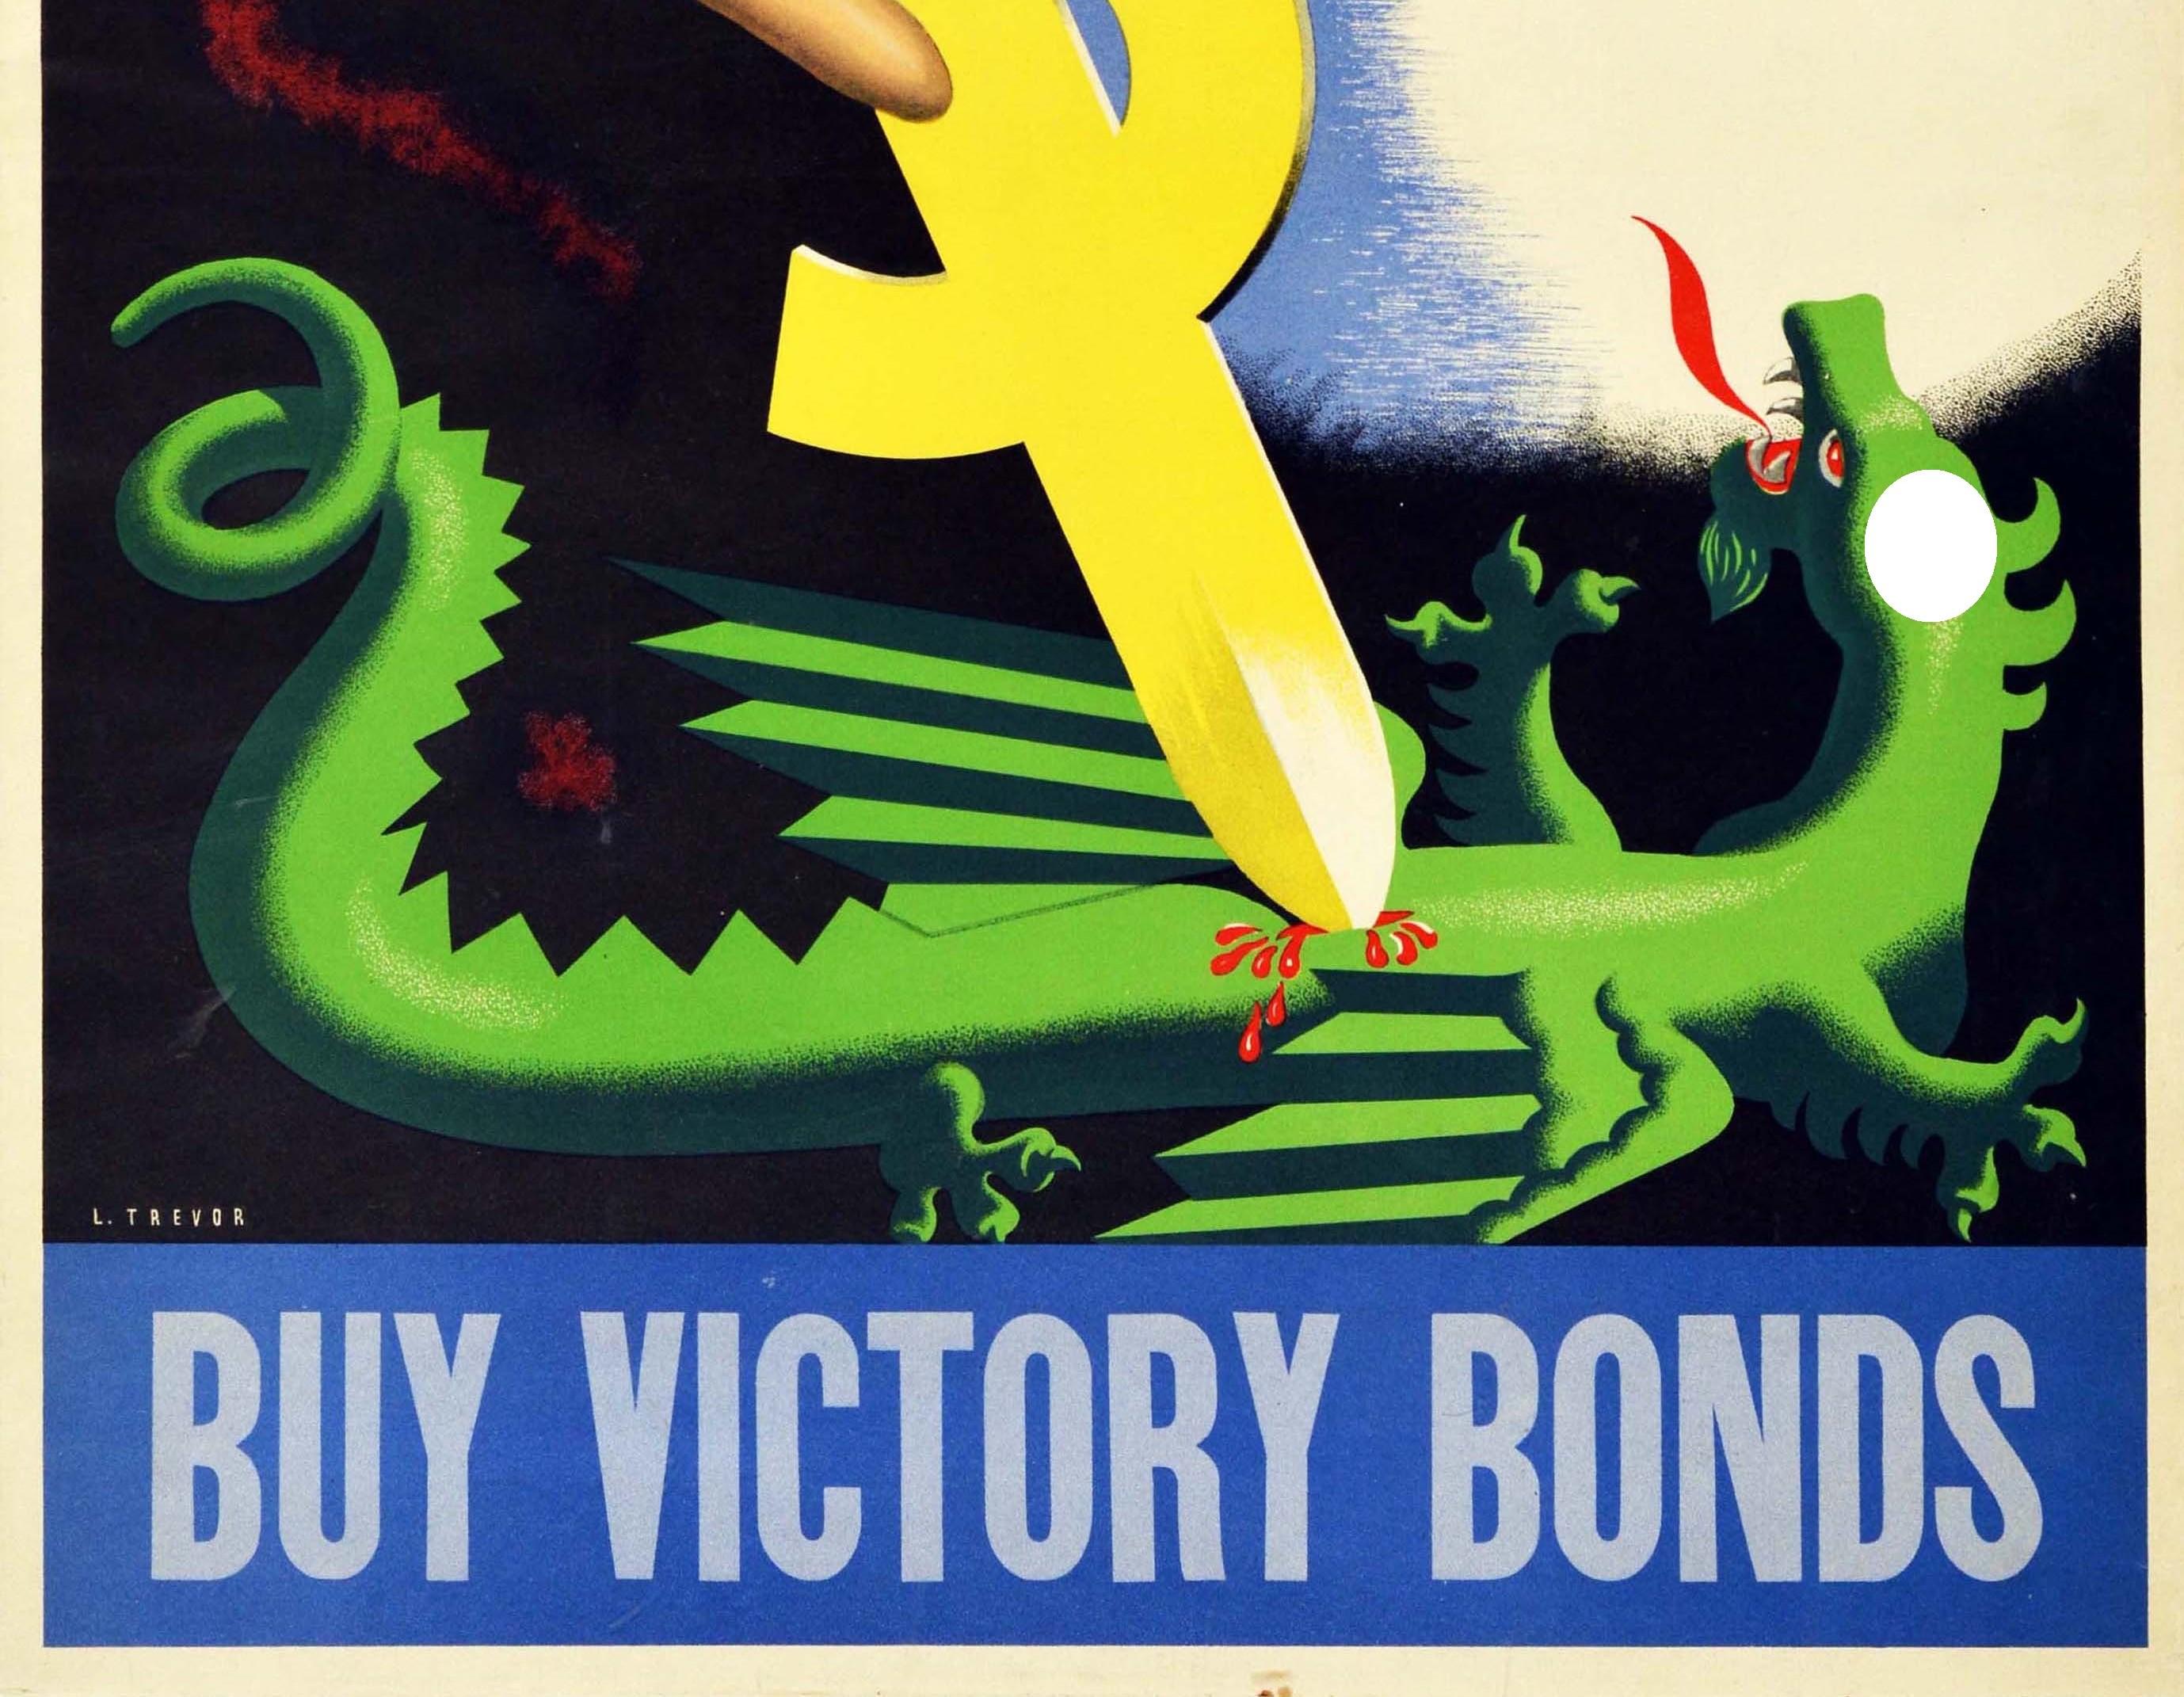 what is the motivation behind the “buy the new victory bonds” poster